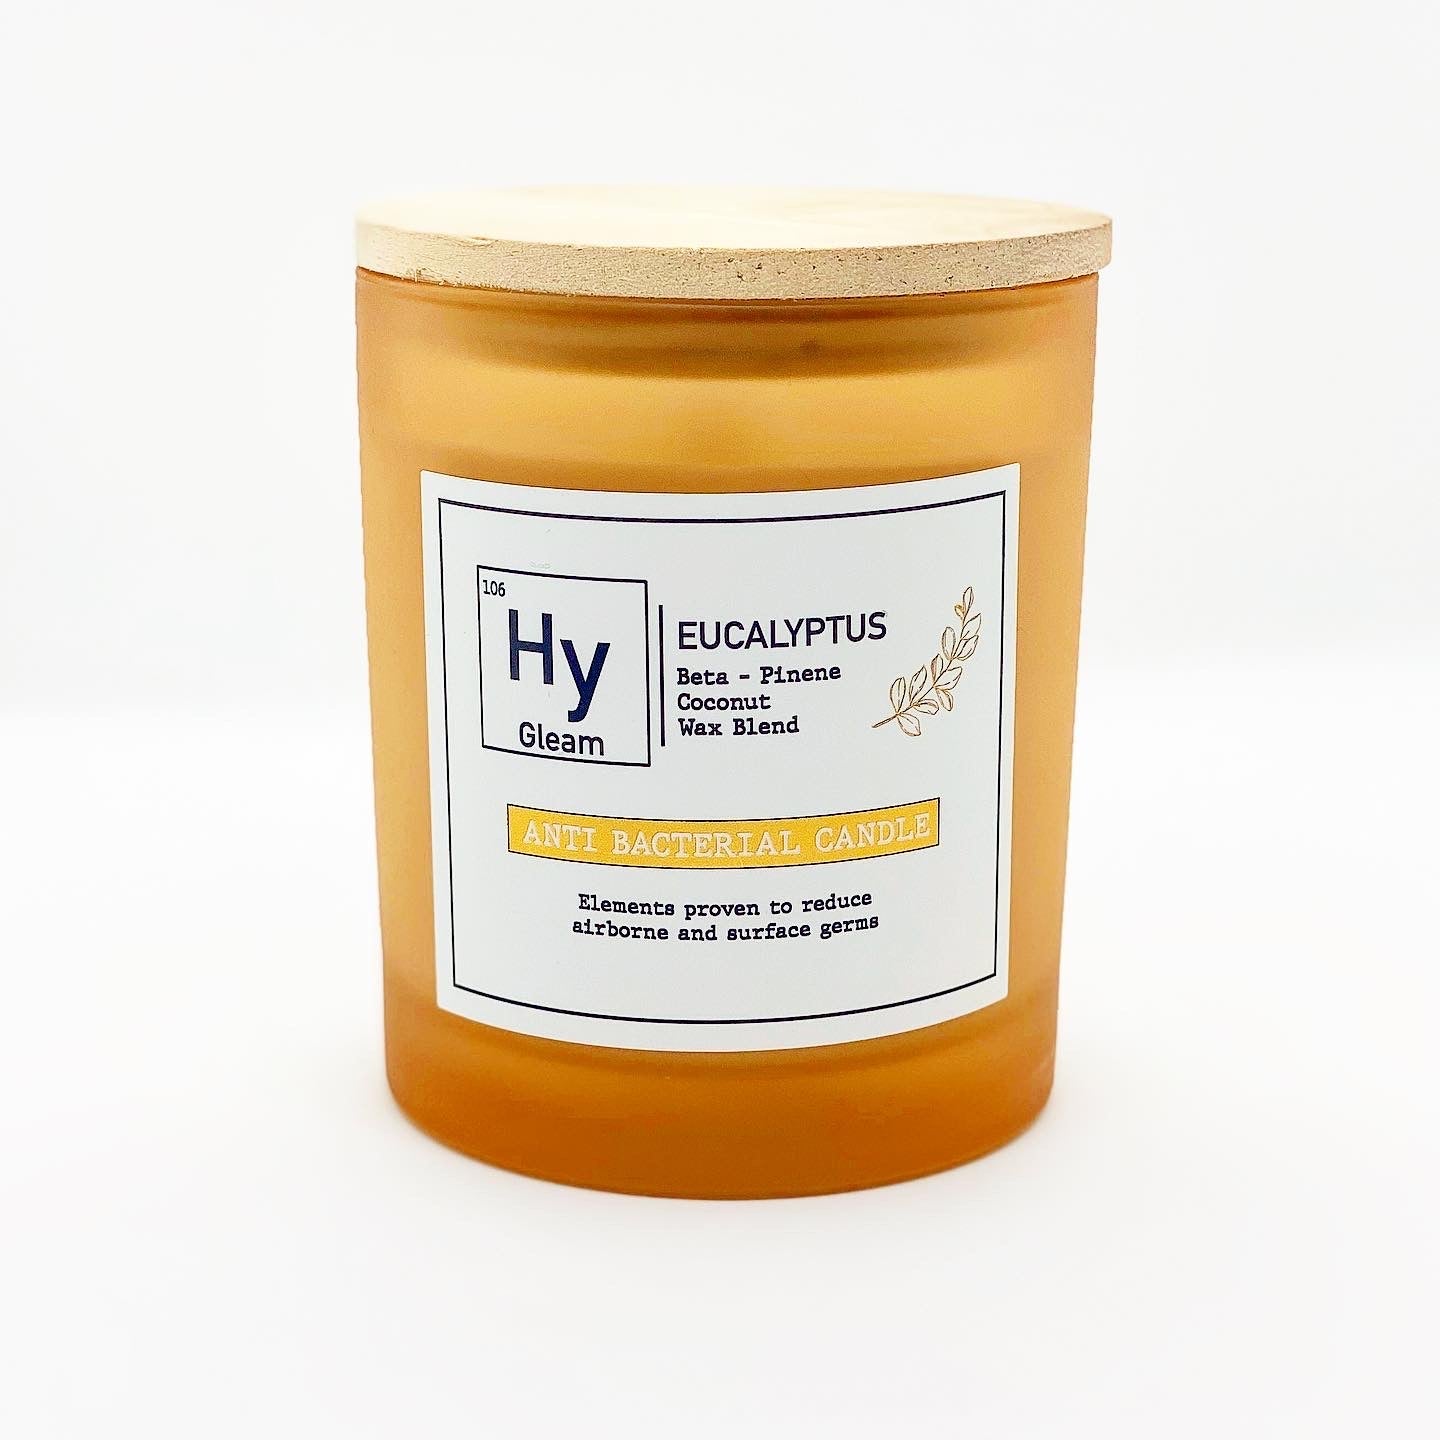 Our Nation's Creations HyGleam Eucalptus Candle Anti Bacterial  Coconut Wax Blend Beta-Pinena